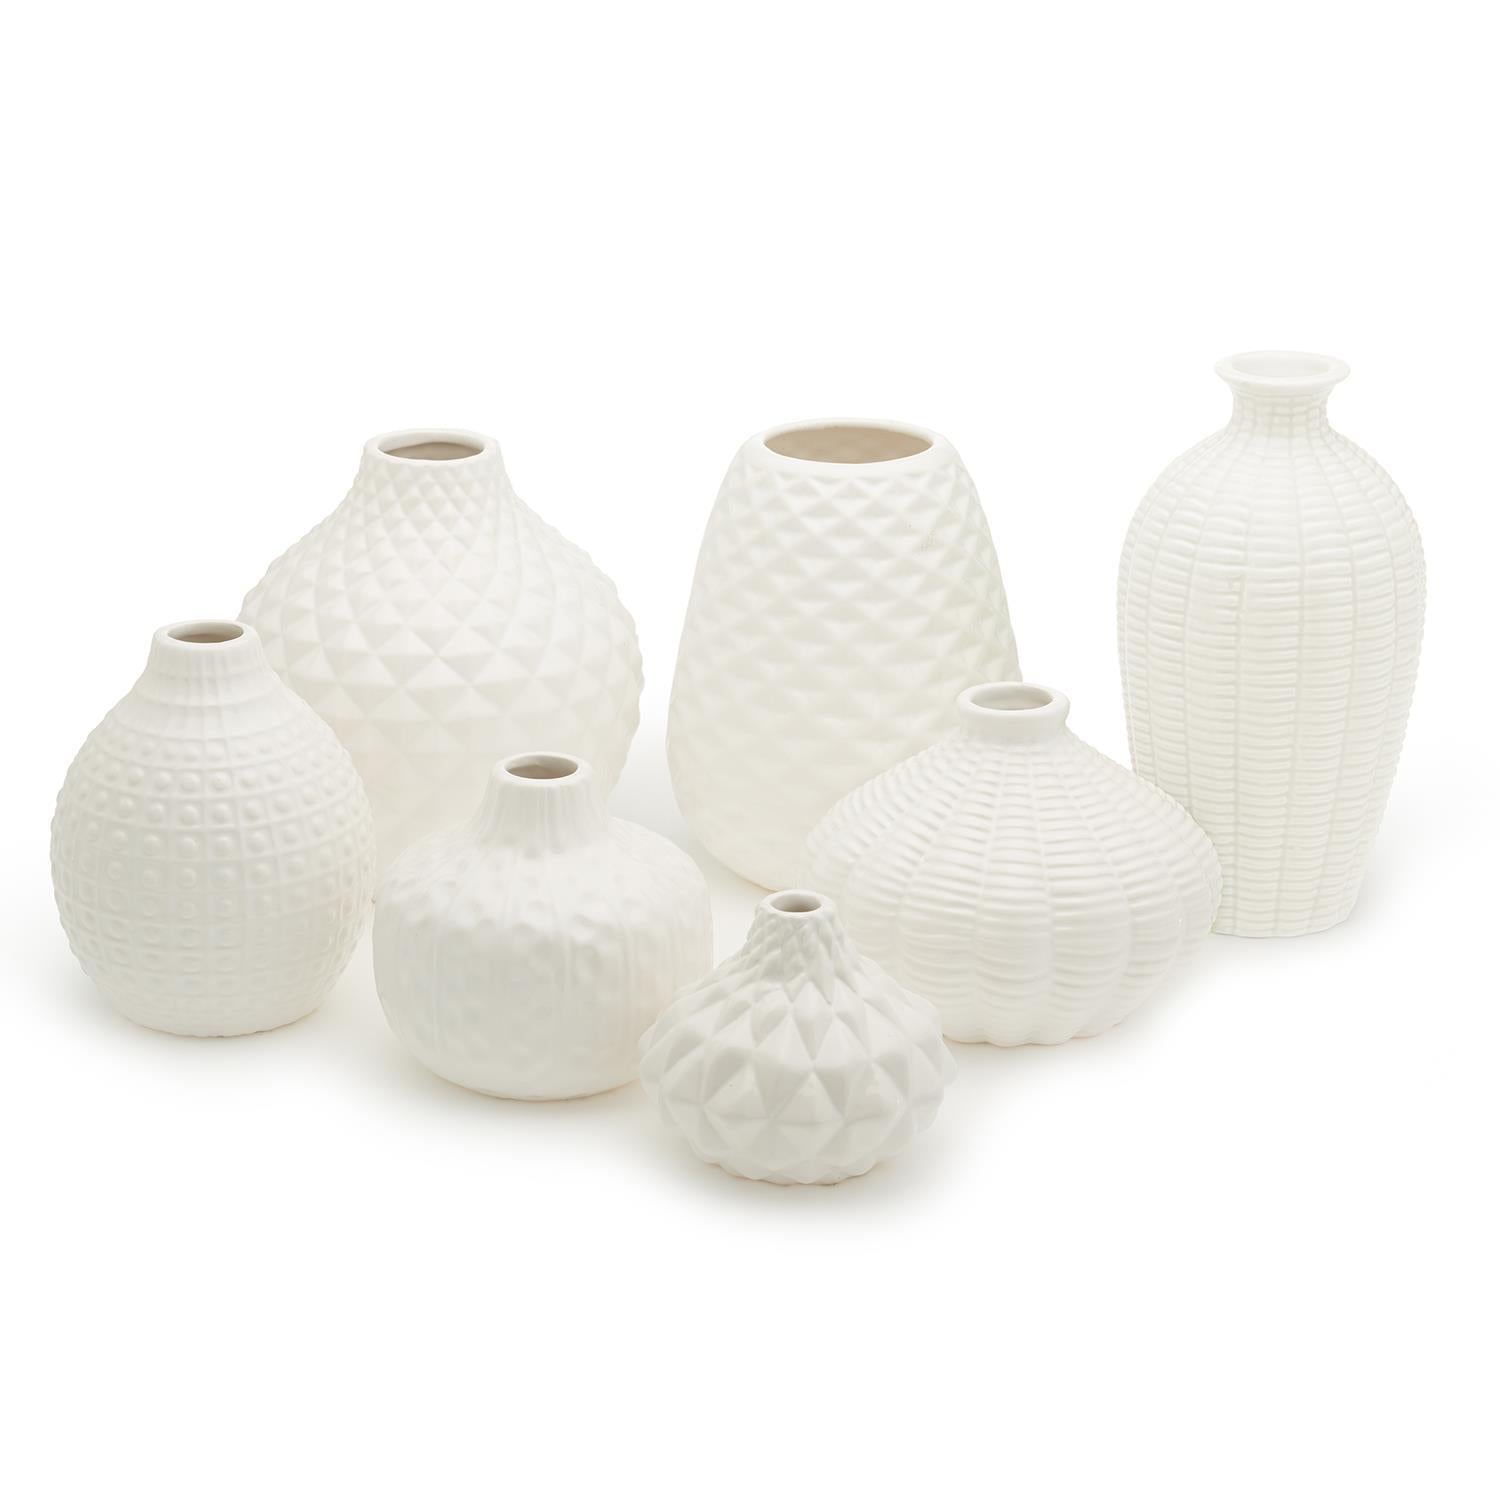 Two's Company Artisan Carvings Vases in White - Ceramic (set of 7)